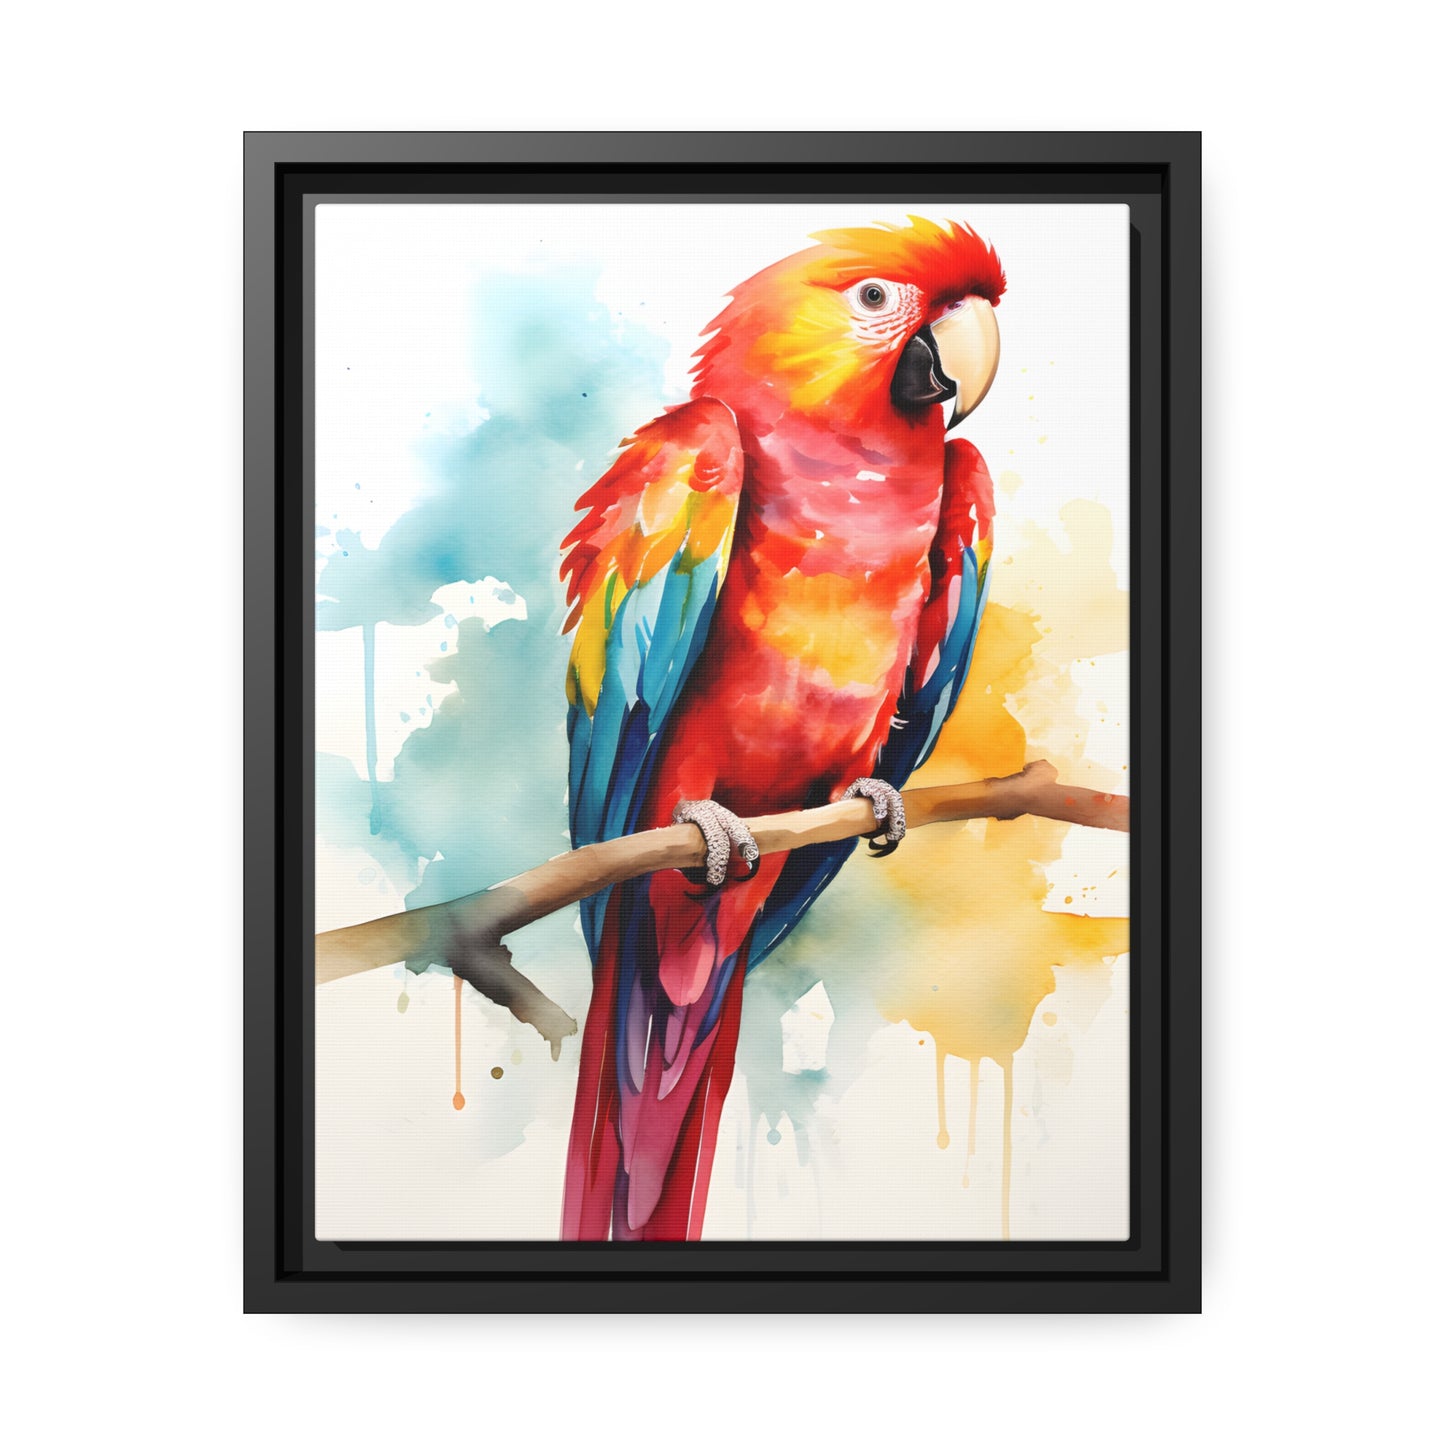 Framed Canvas Artwork Bright Red Parrot With Rainbow Wings Perched On A Tree Branch Nature Influenced Water Color Painting Style